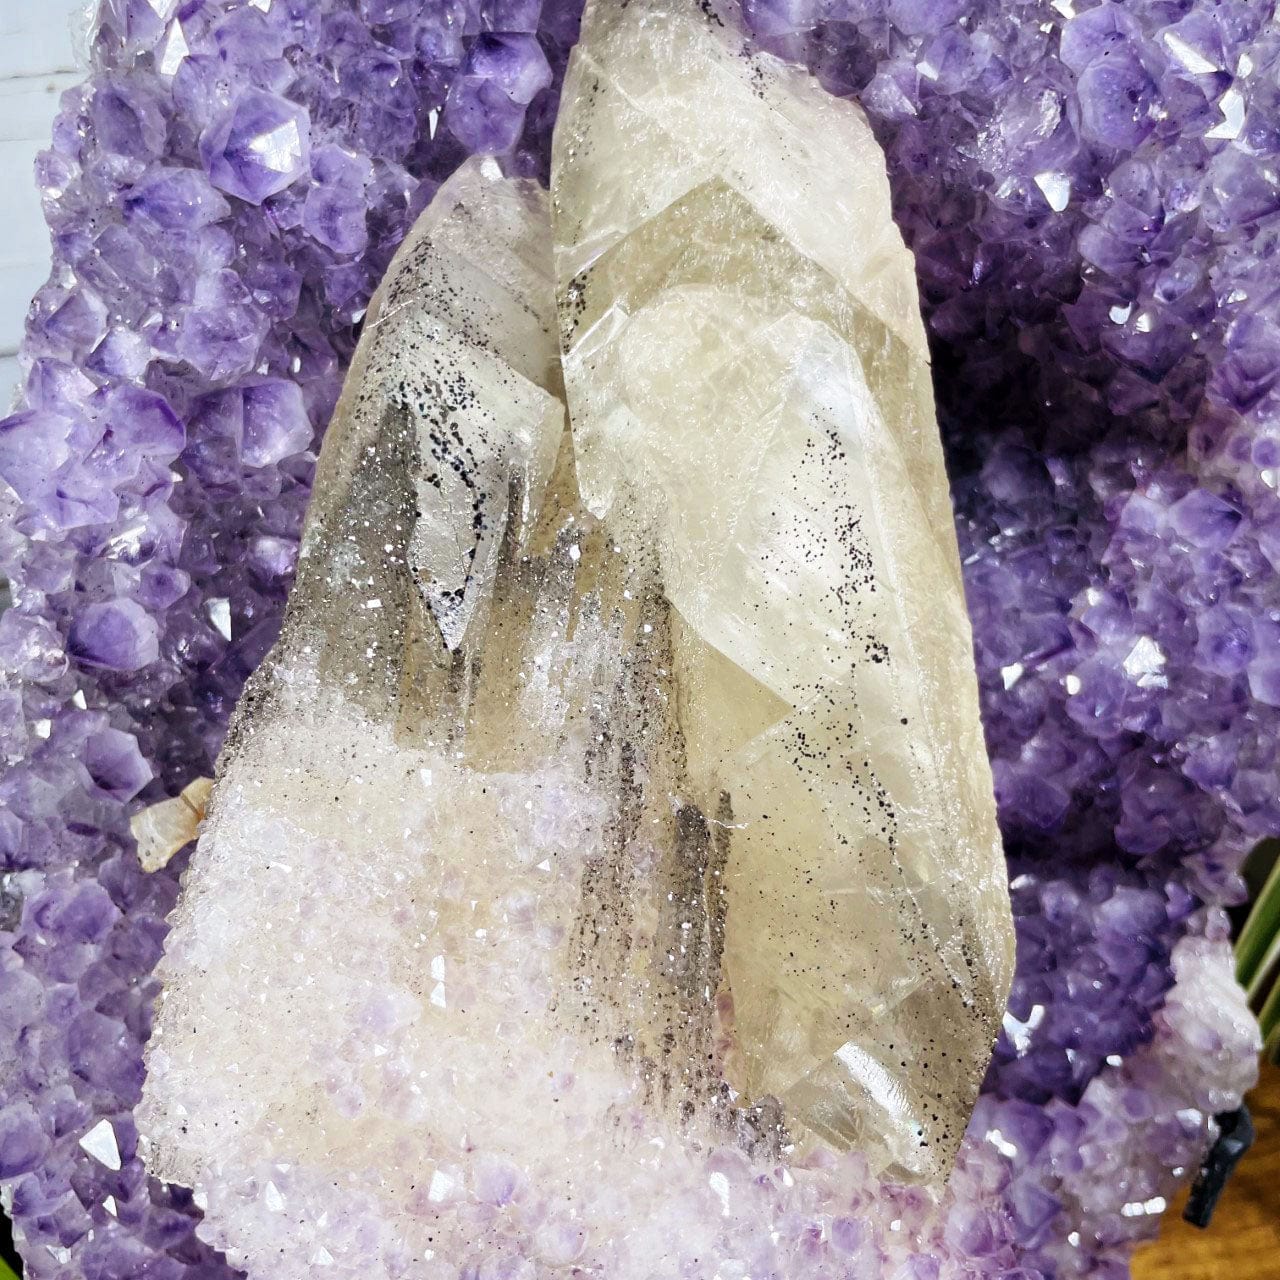 Amethyst Cluster with Calcite and Druzy on Metal Stand up close showing the silver druzy on the calcite